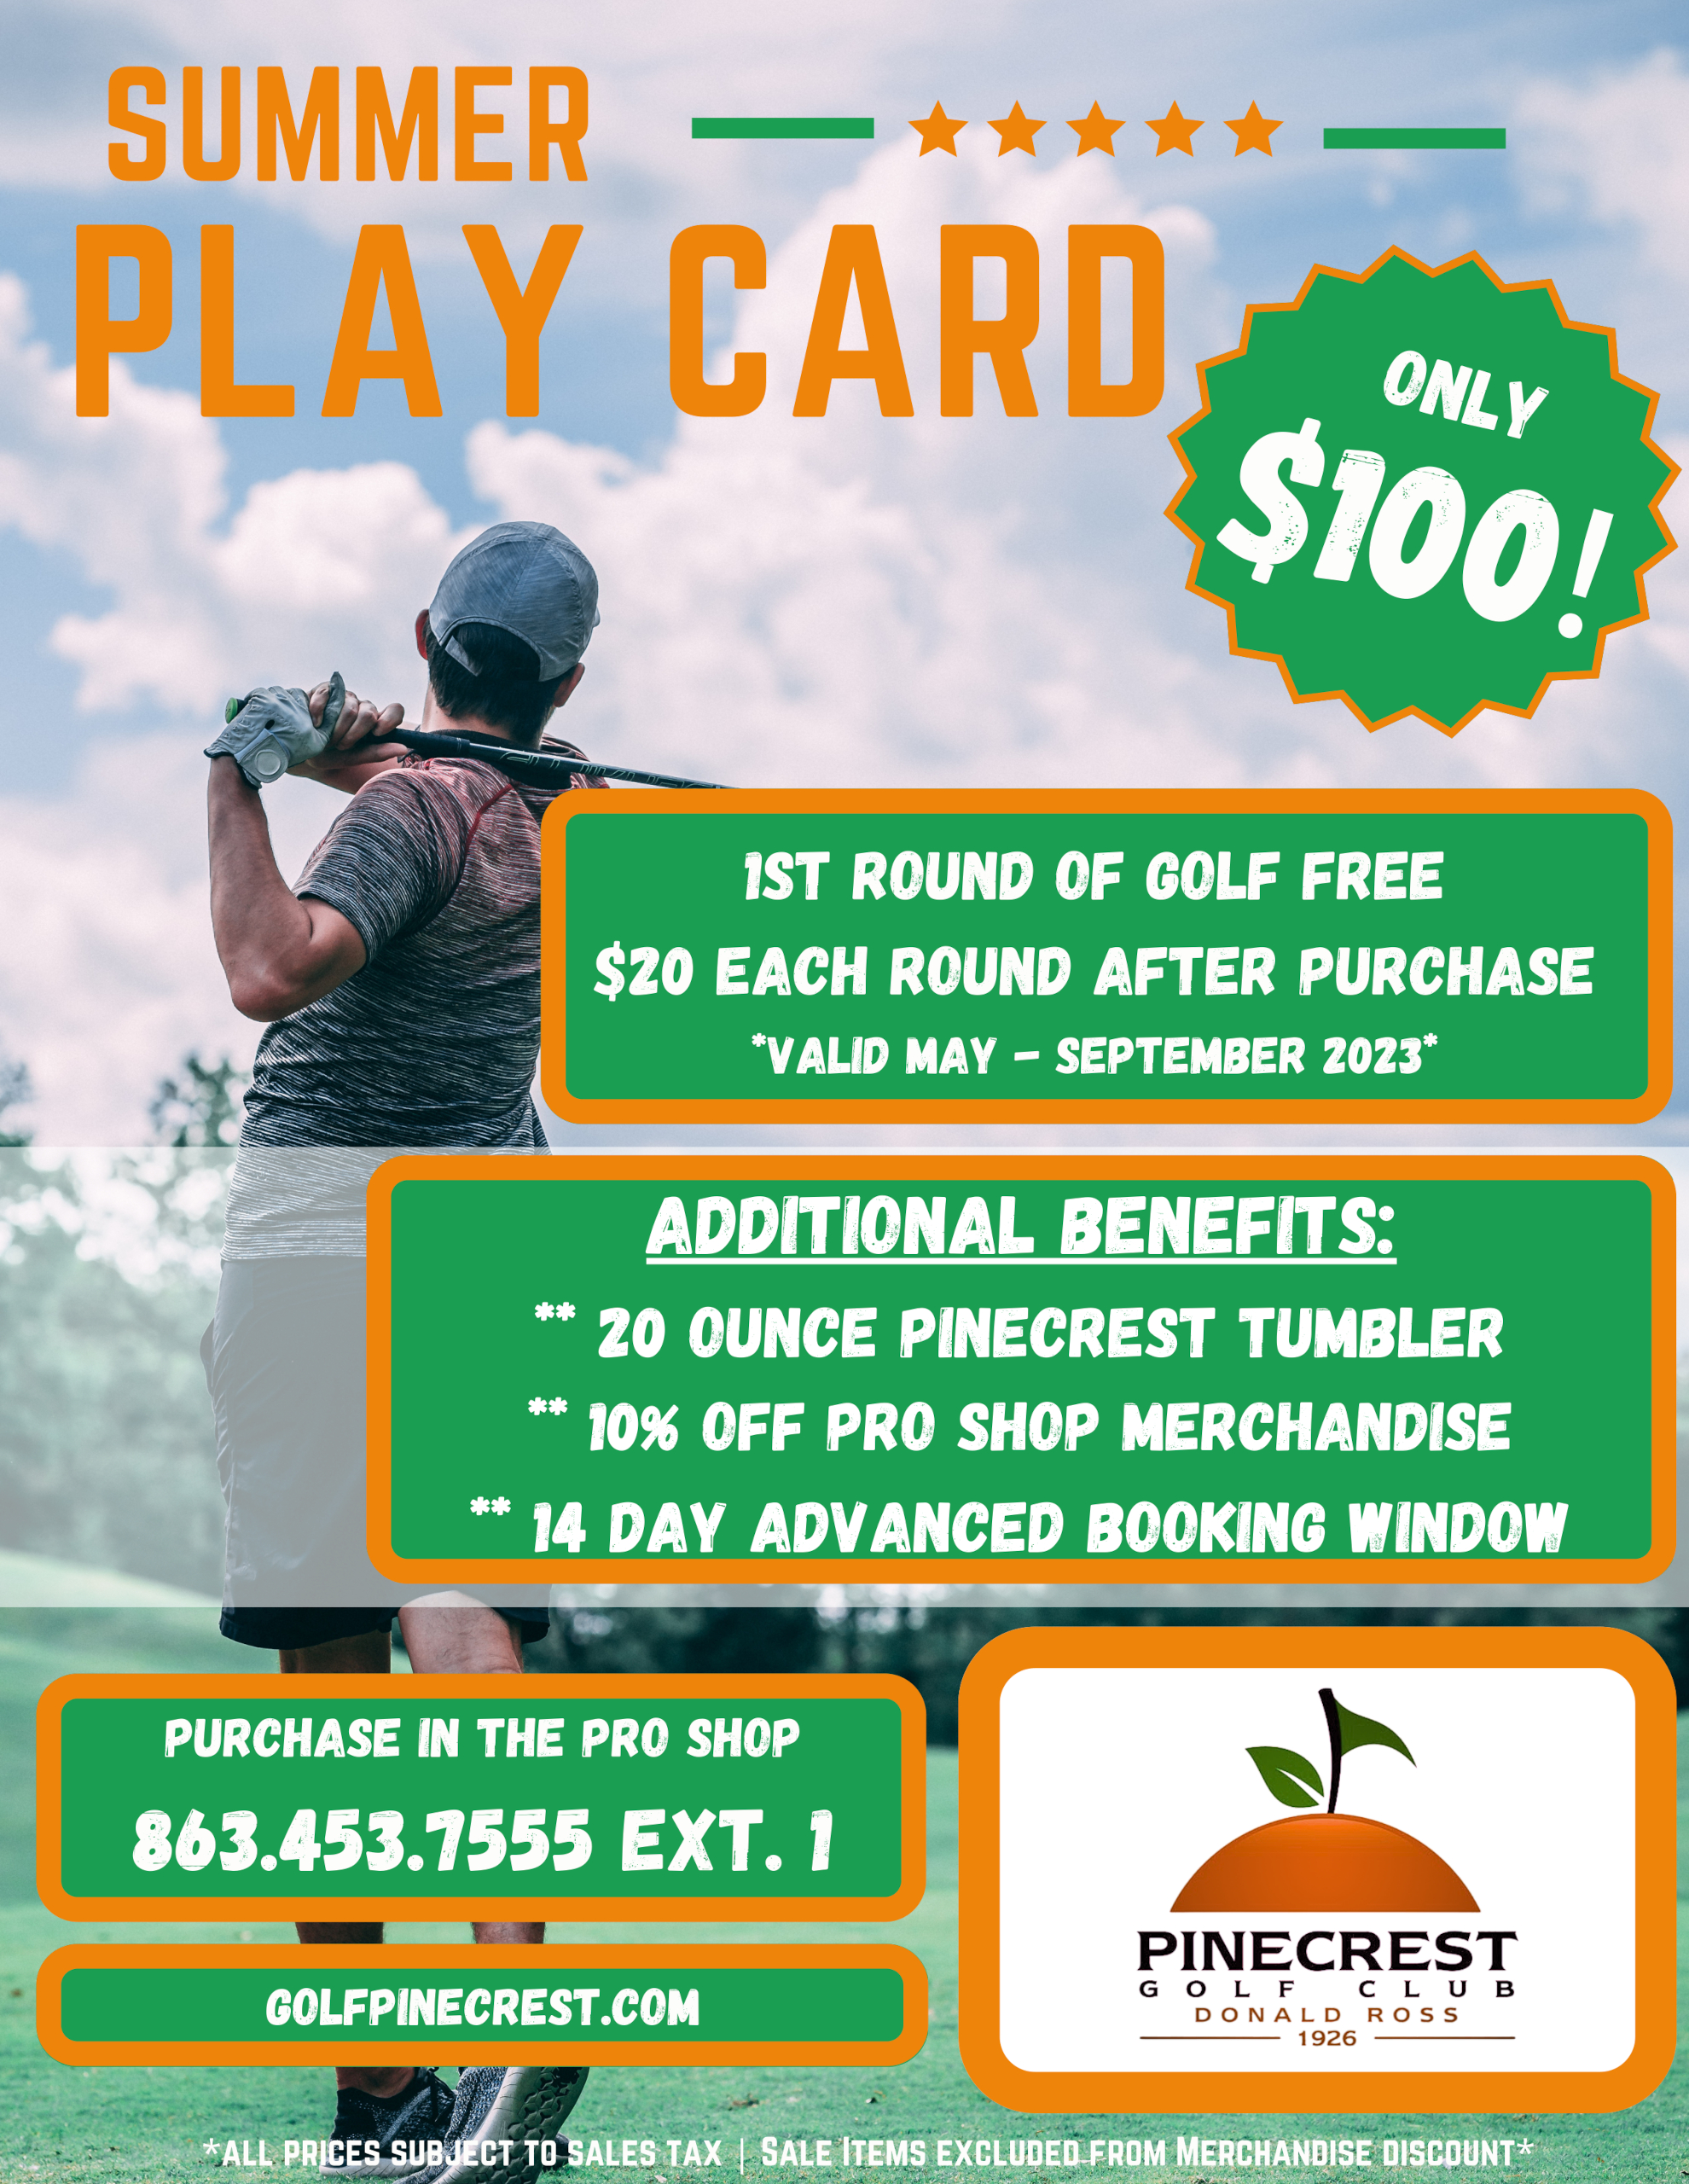 Pinecrest Golf Club | Home (EngageBox) - (2023) Pinecrest Golf Club Home (EngageBox) – (2023) Pinecrest Golf Club Summer Play Card Popup / Promo (Image #1)